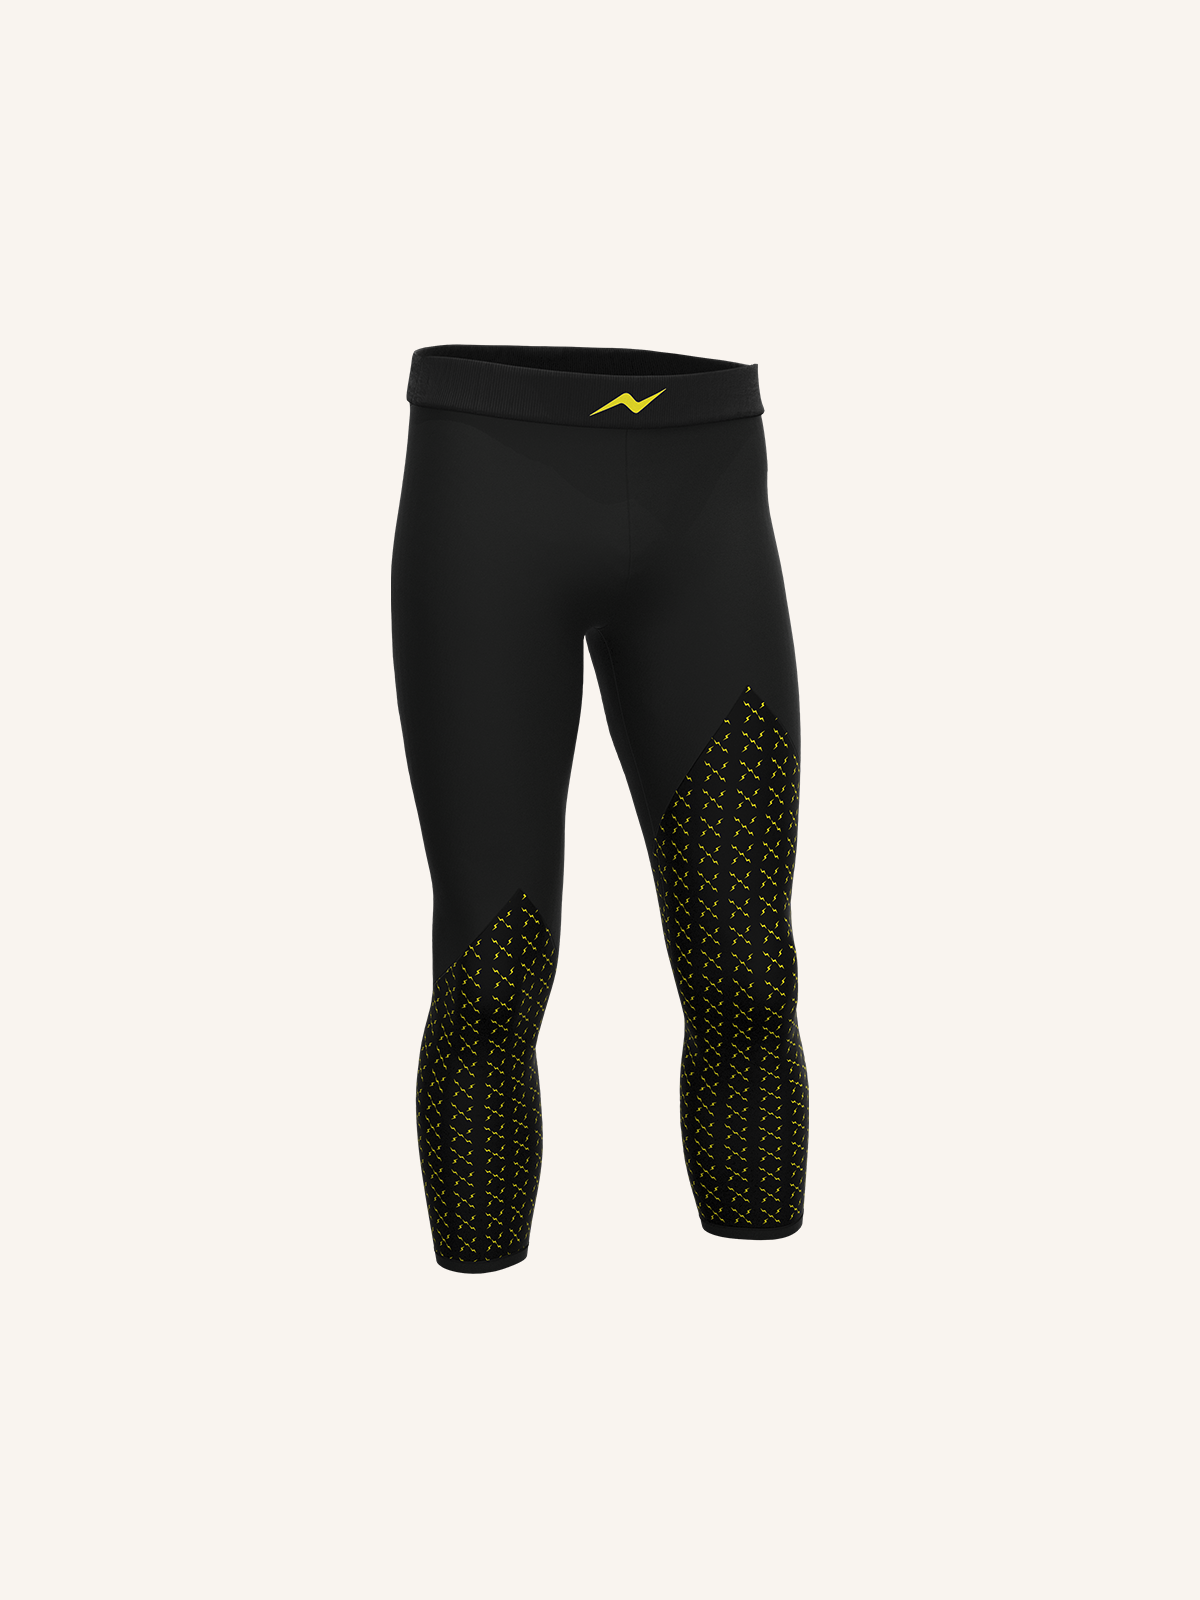 Men's 3/4 Outdoor Tights | Single Pack | PRS PRO 402